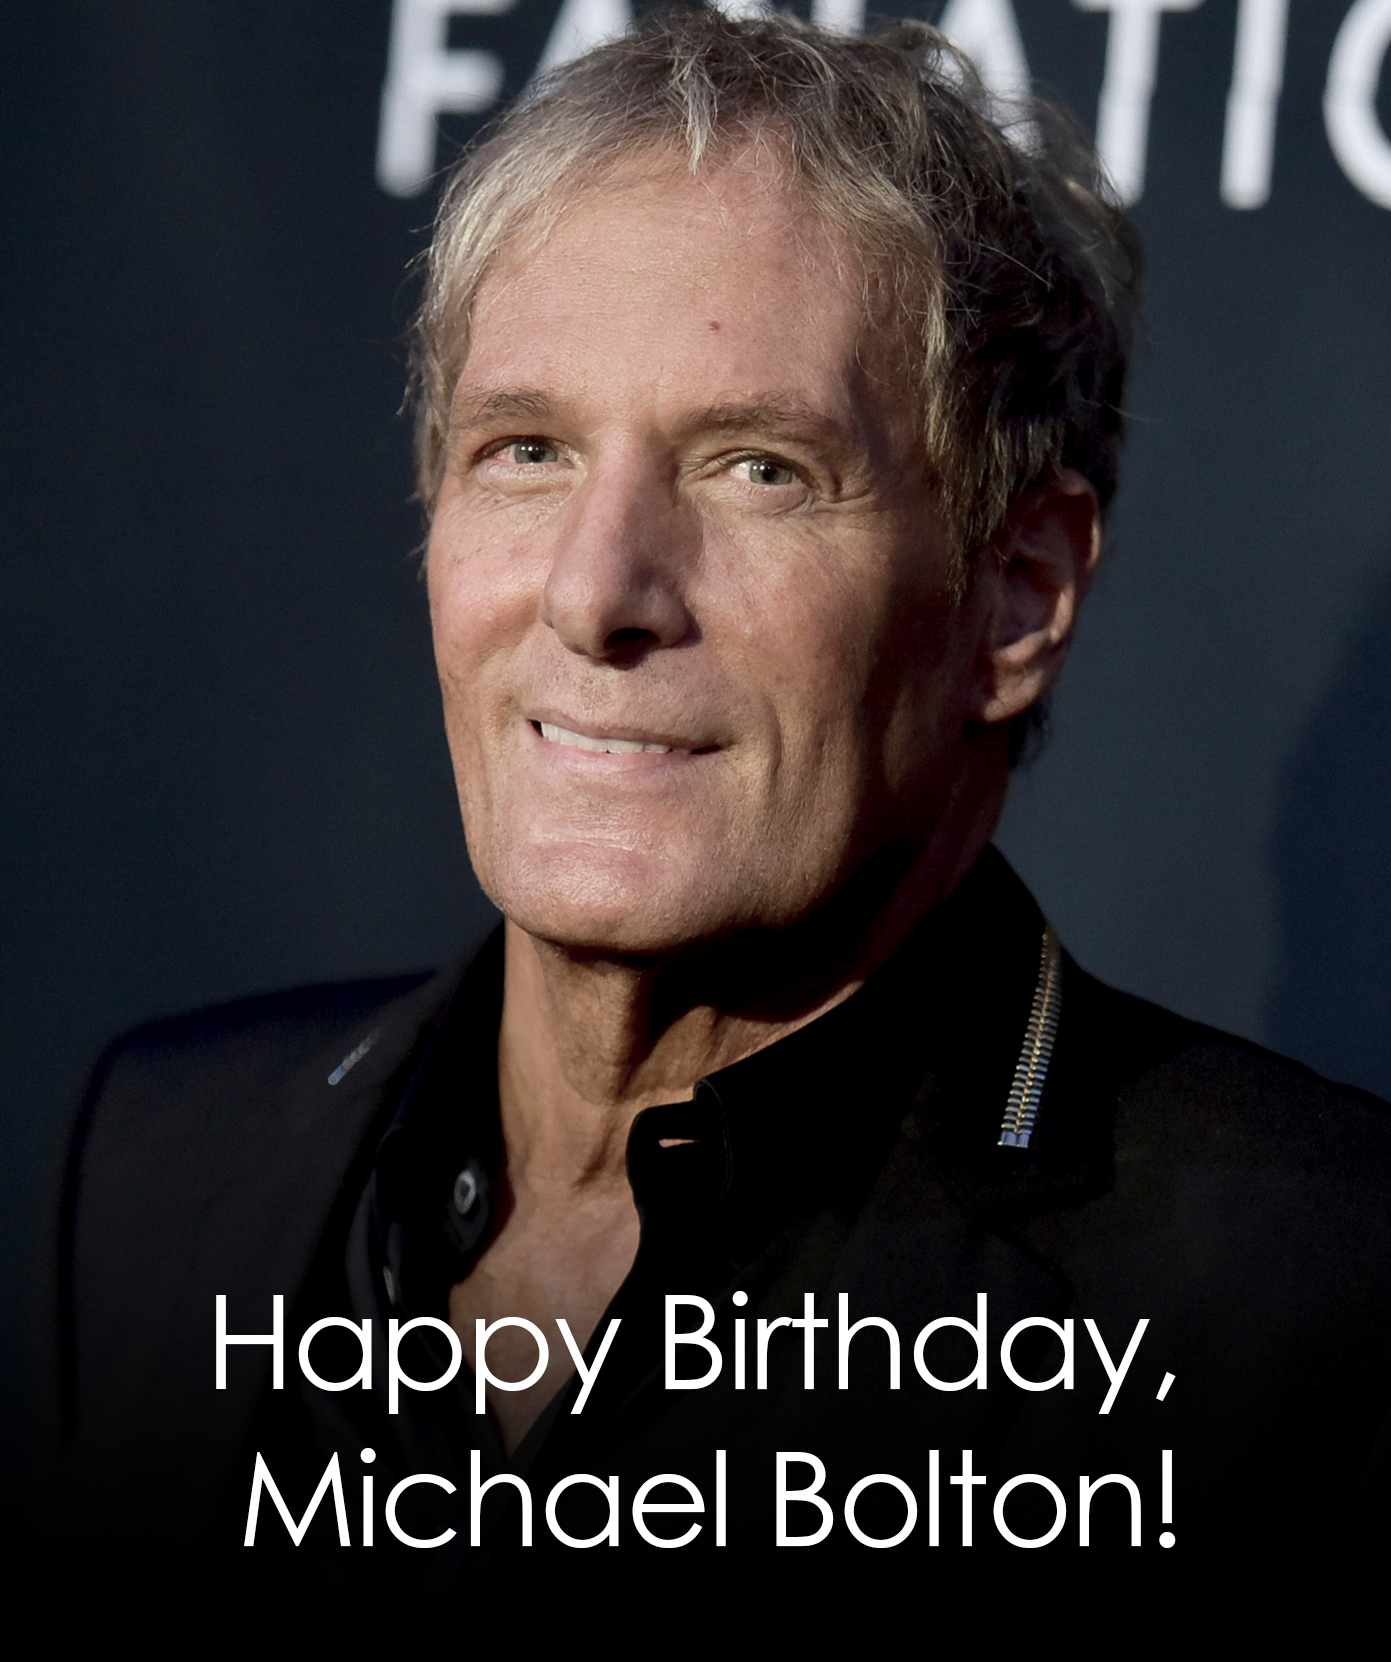 Happy birthday to Michael Bolton! The singer-songwriter turns 69 today.  